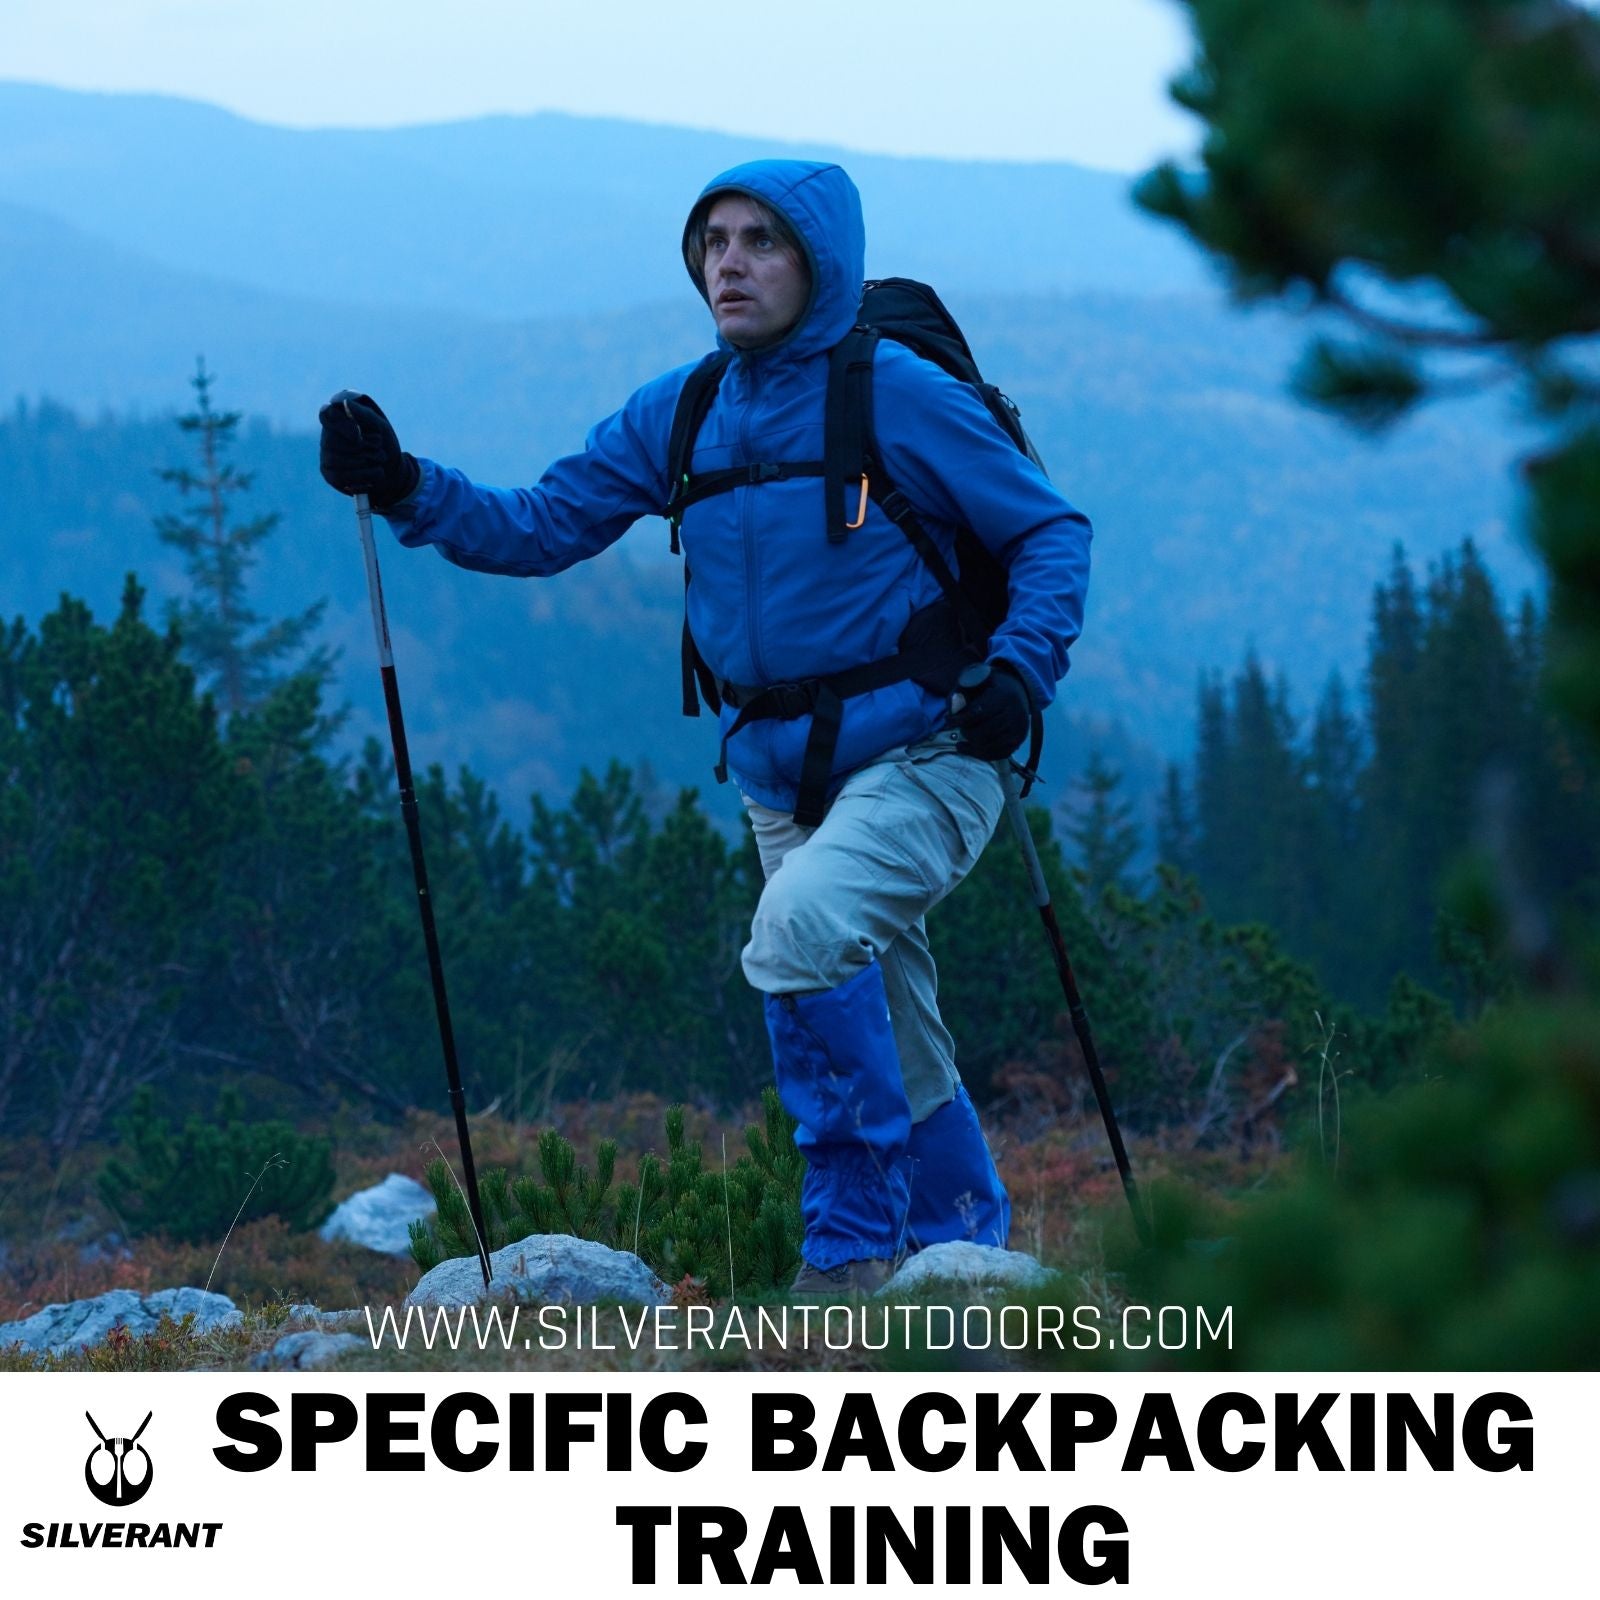 Specific Backpacking Training